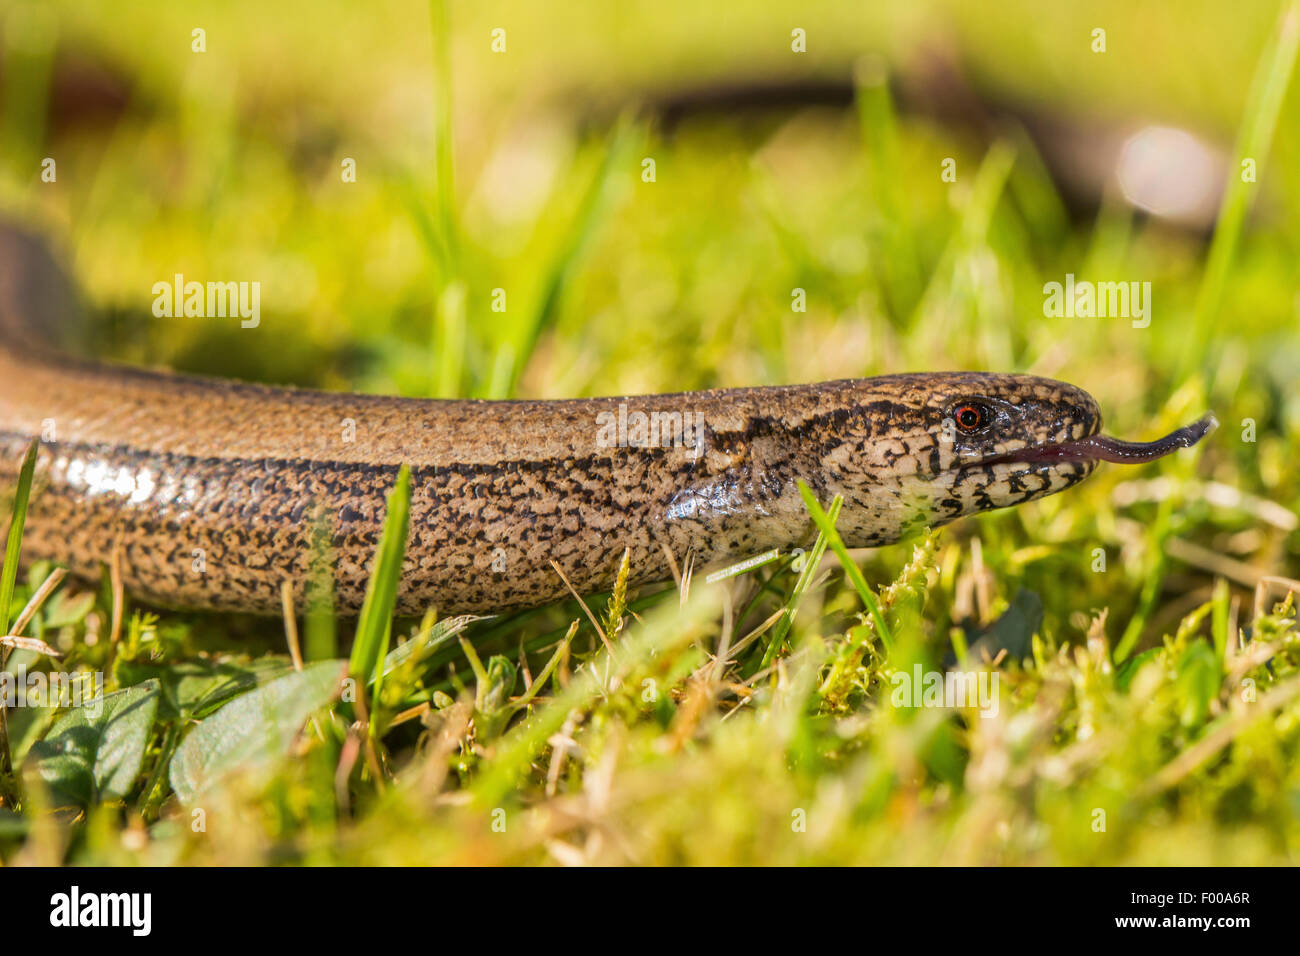 European slow worm, blindworm, slow worm (Anguis fragilis), darting tongue in and out, Germany, Bavaria, Isental Stock Photo